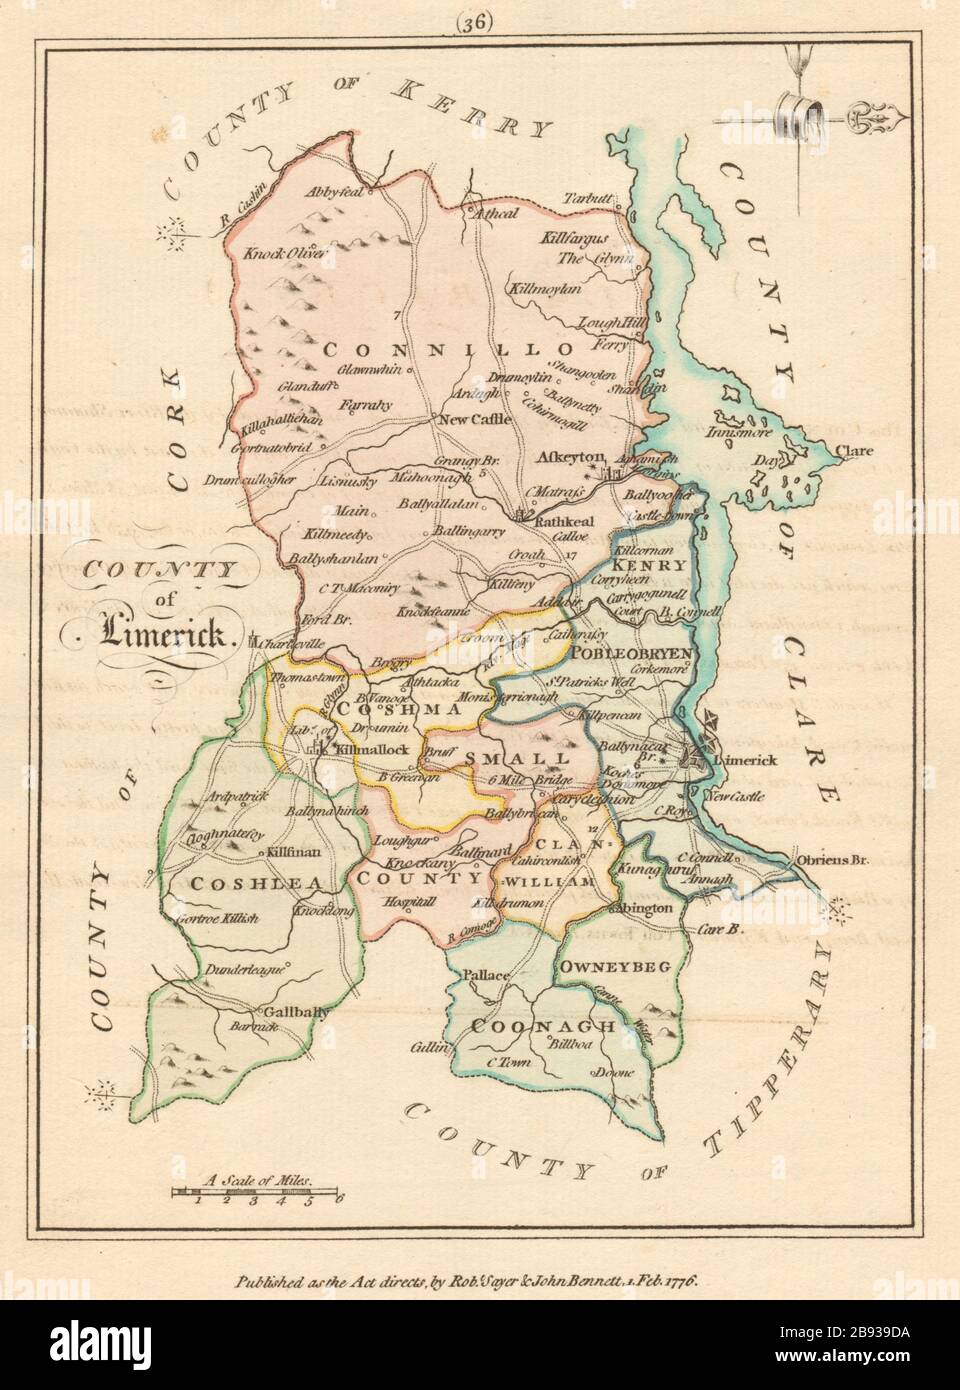 County of Limerick, Munster. Antique copperplate map by Scalé / Sayer 1776 Stock Photo